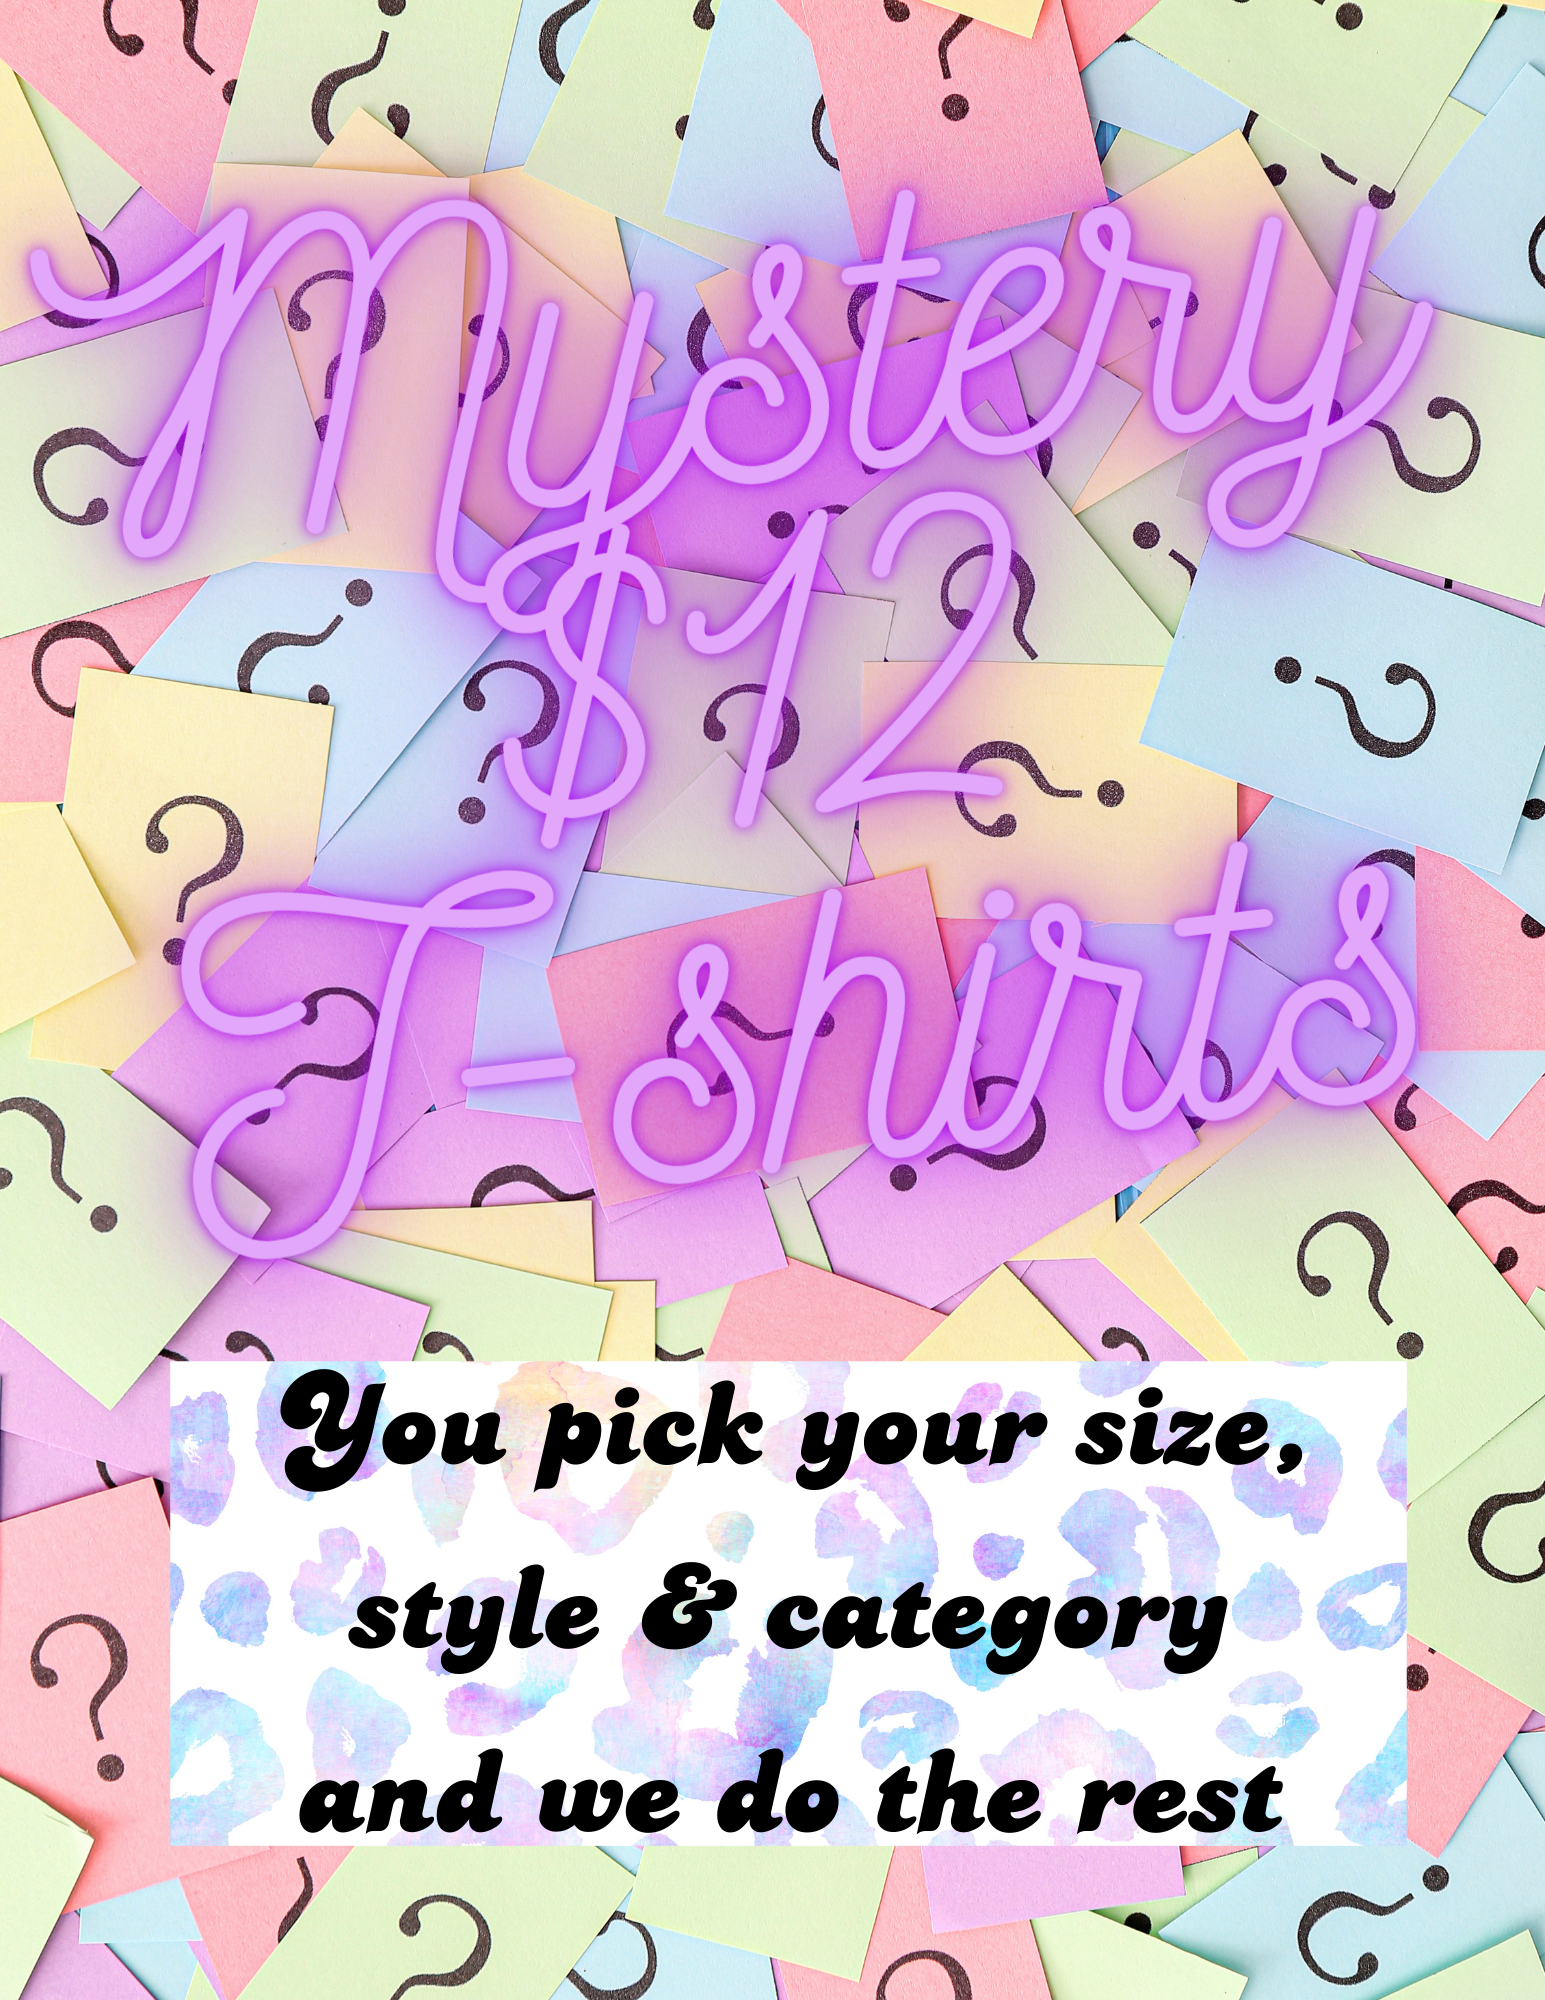 $12 Mystery T-SHIRTS (S-5X)